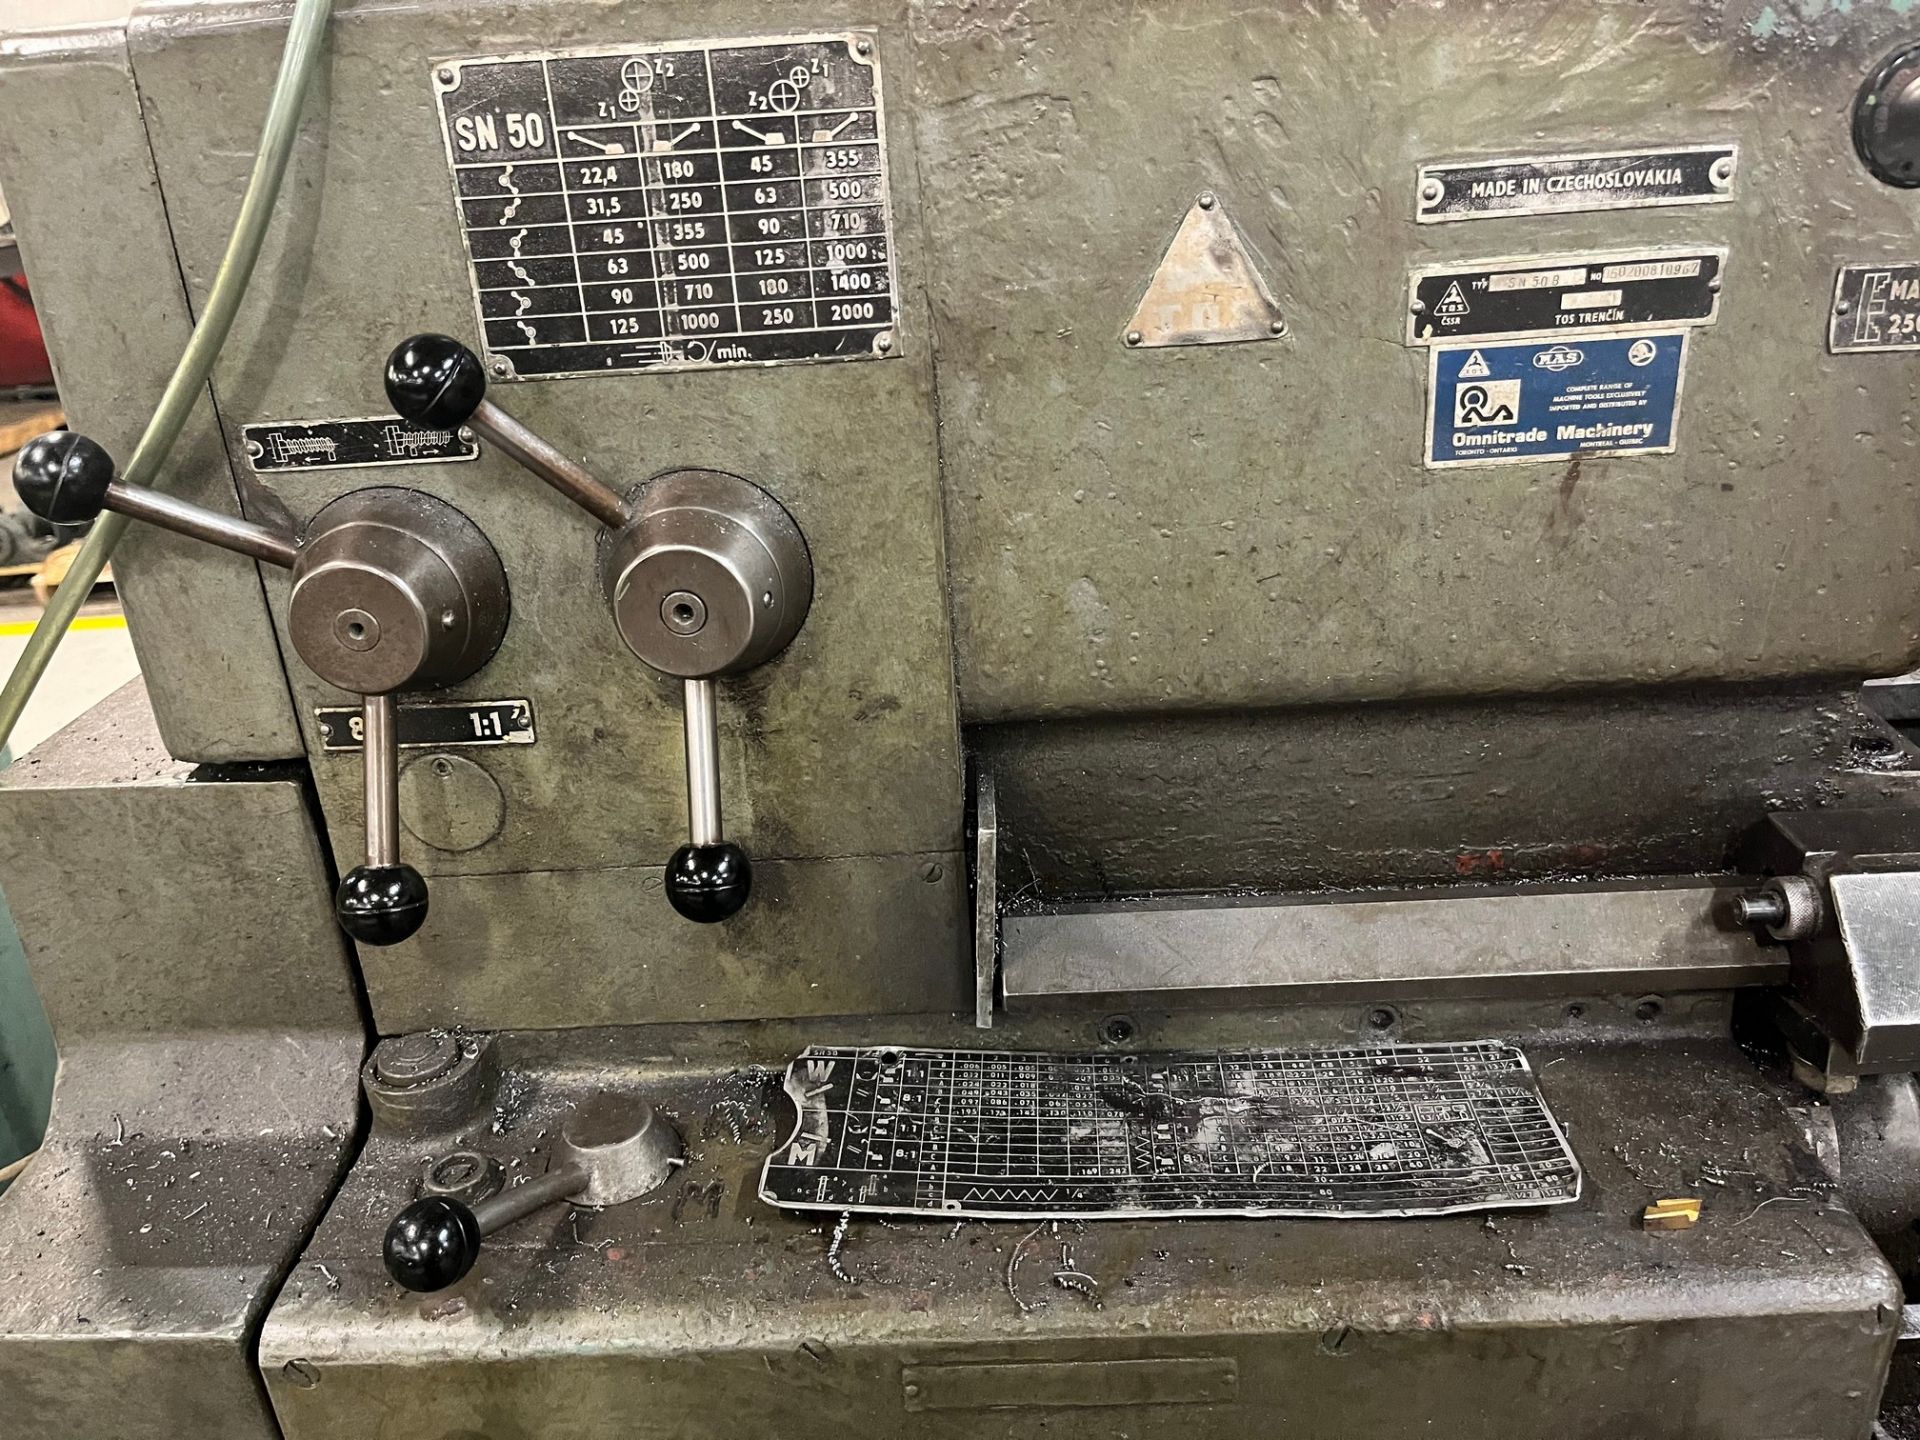 TOS SN50B LATHE, 3-JAW CHUCK, TOOL POST, TAILSTOCK, STEADY REST, S/N 050200810967 W/ ASST. TOOLING - Image 3 of 4